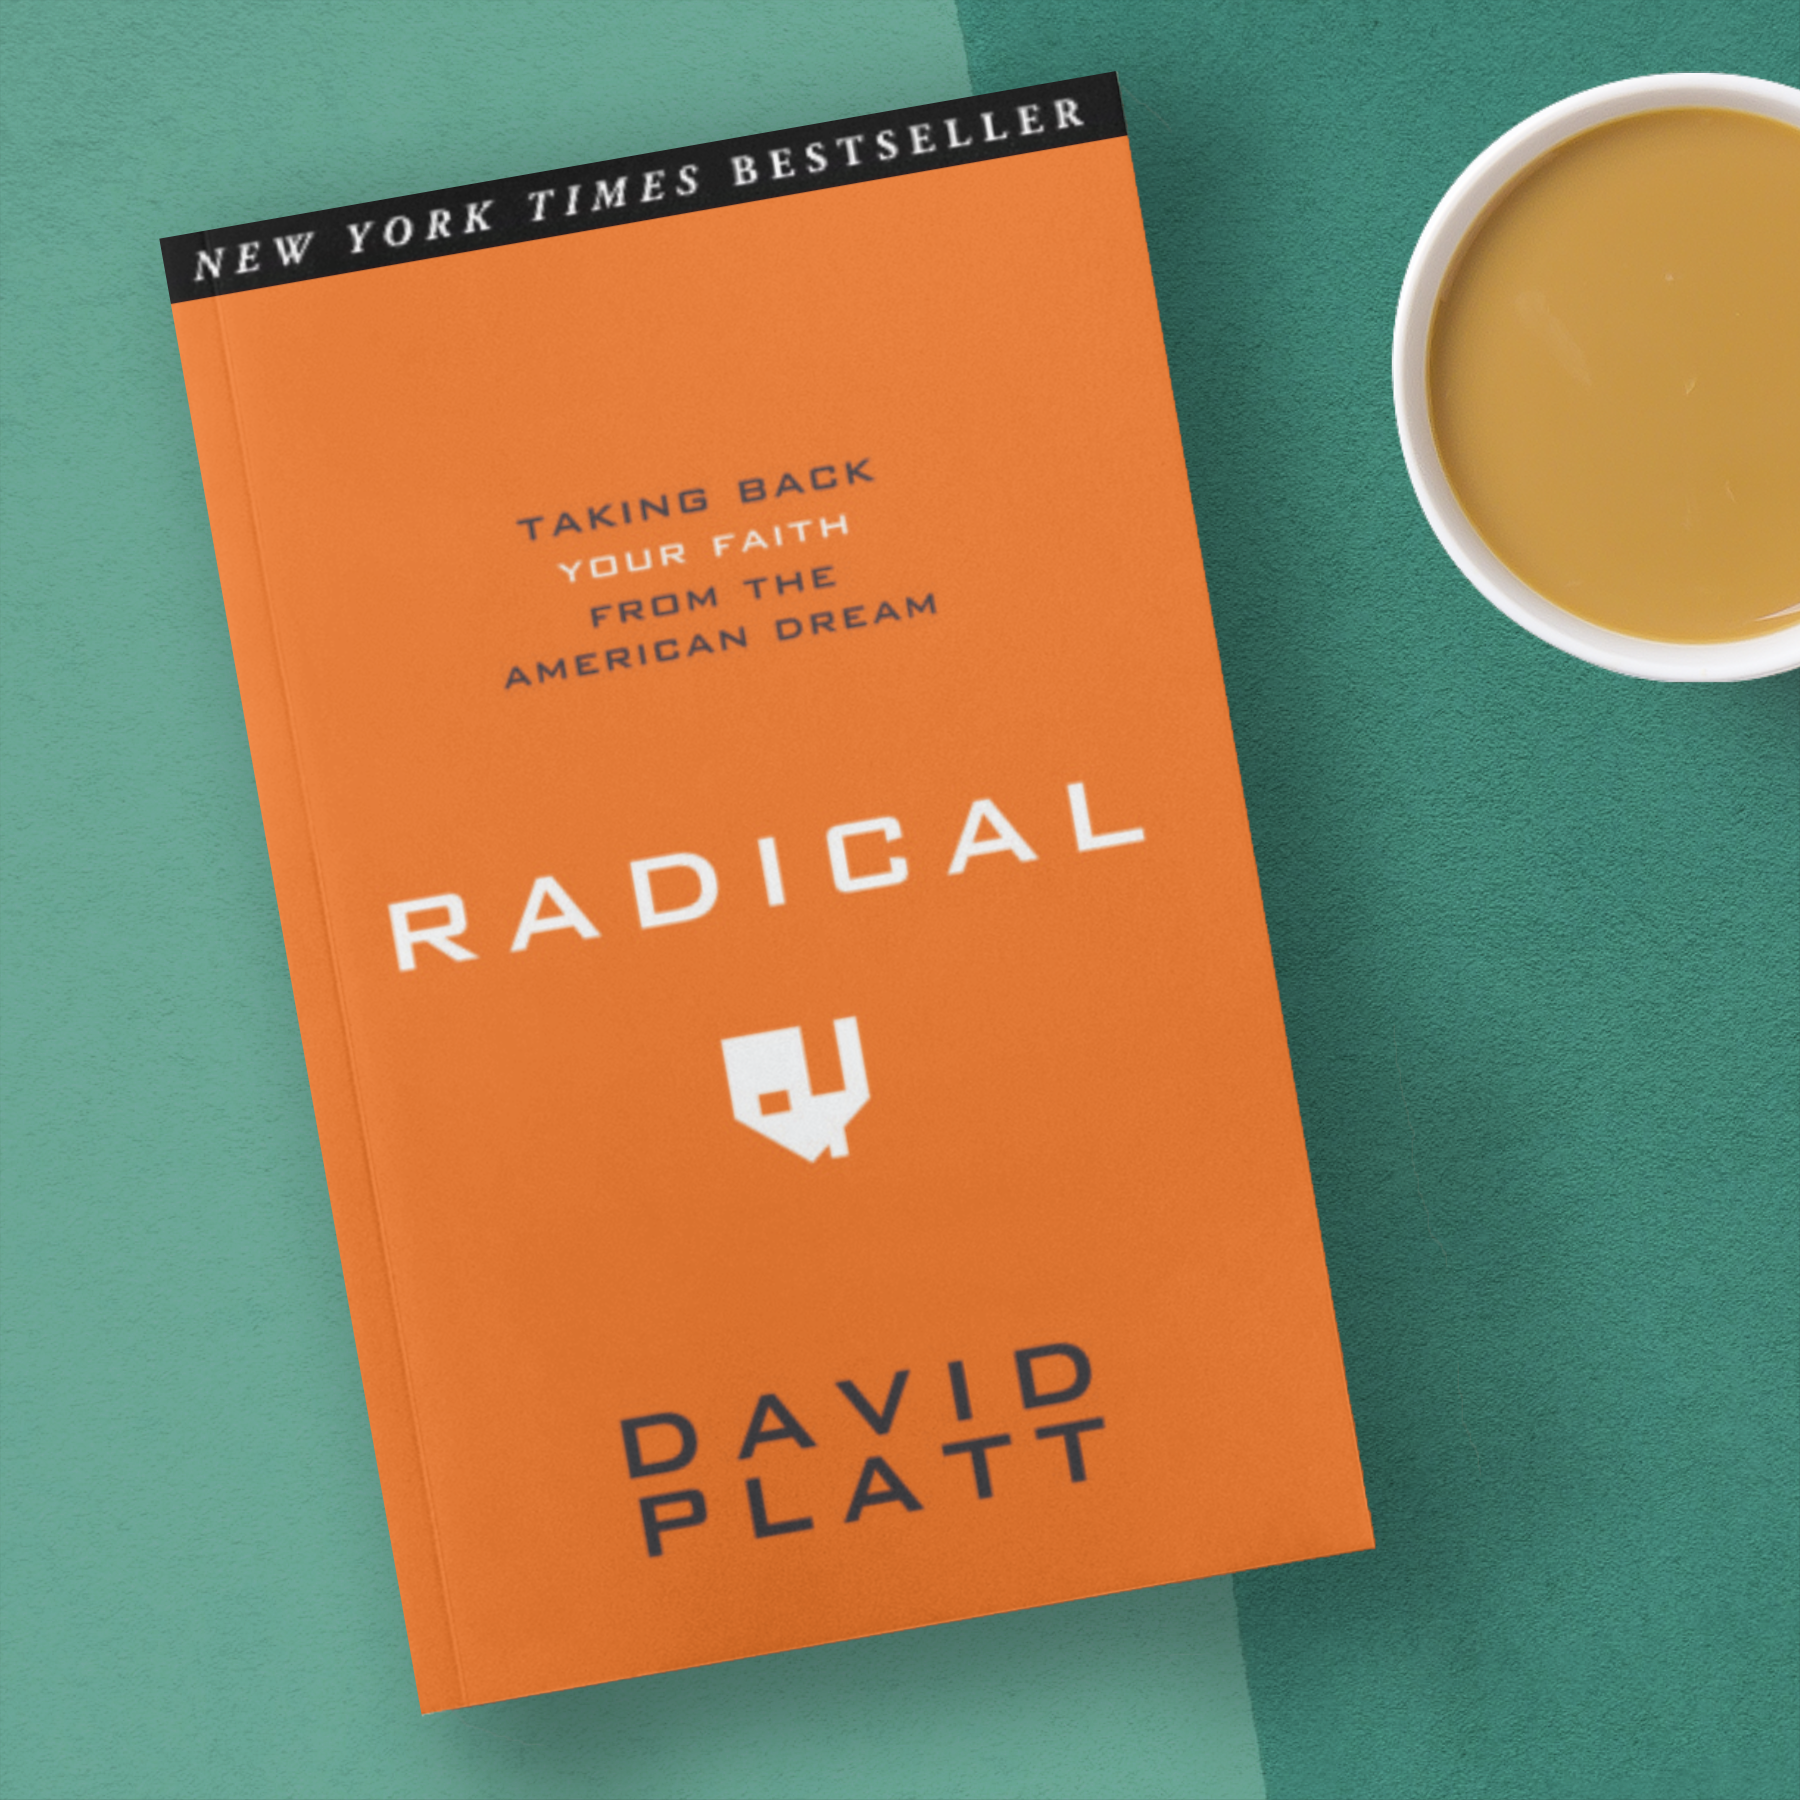 Book Review: “Radical: Taking Back Your Faith from American Dream” by David Platt